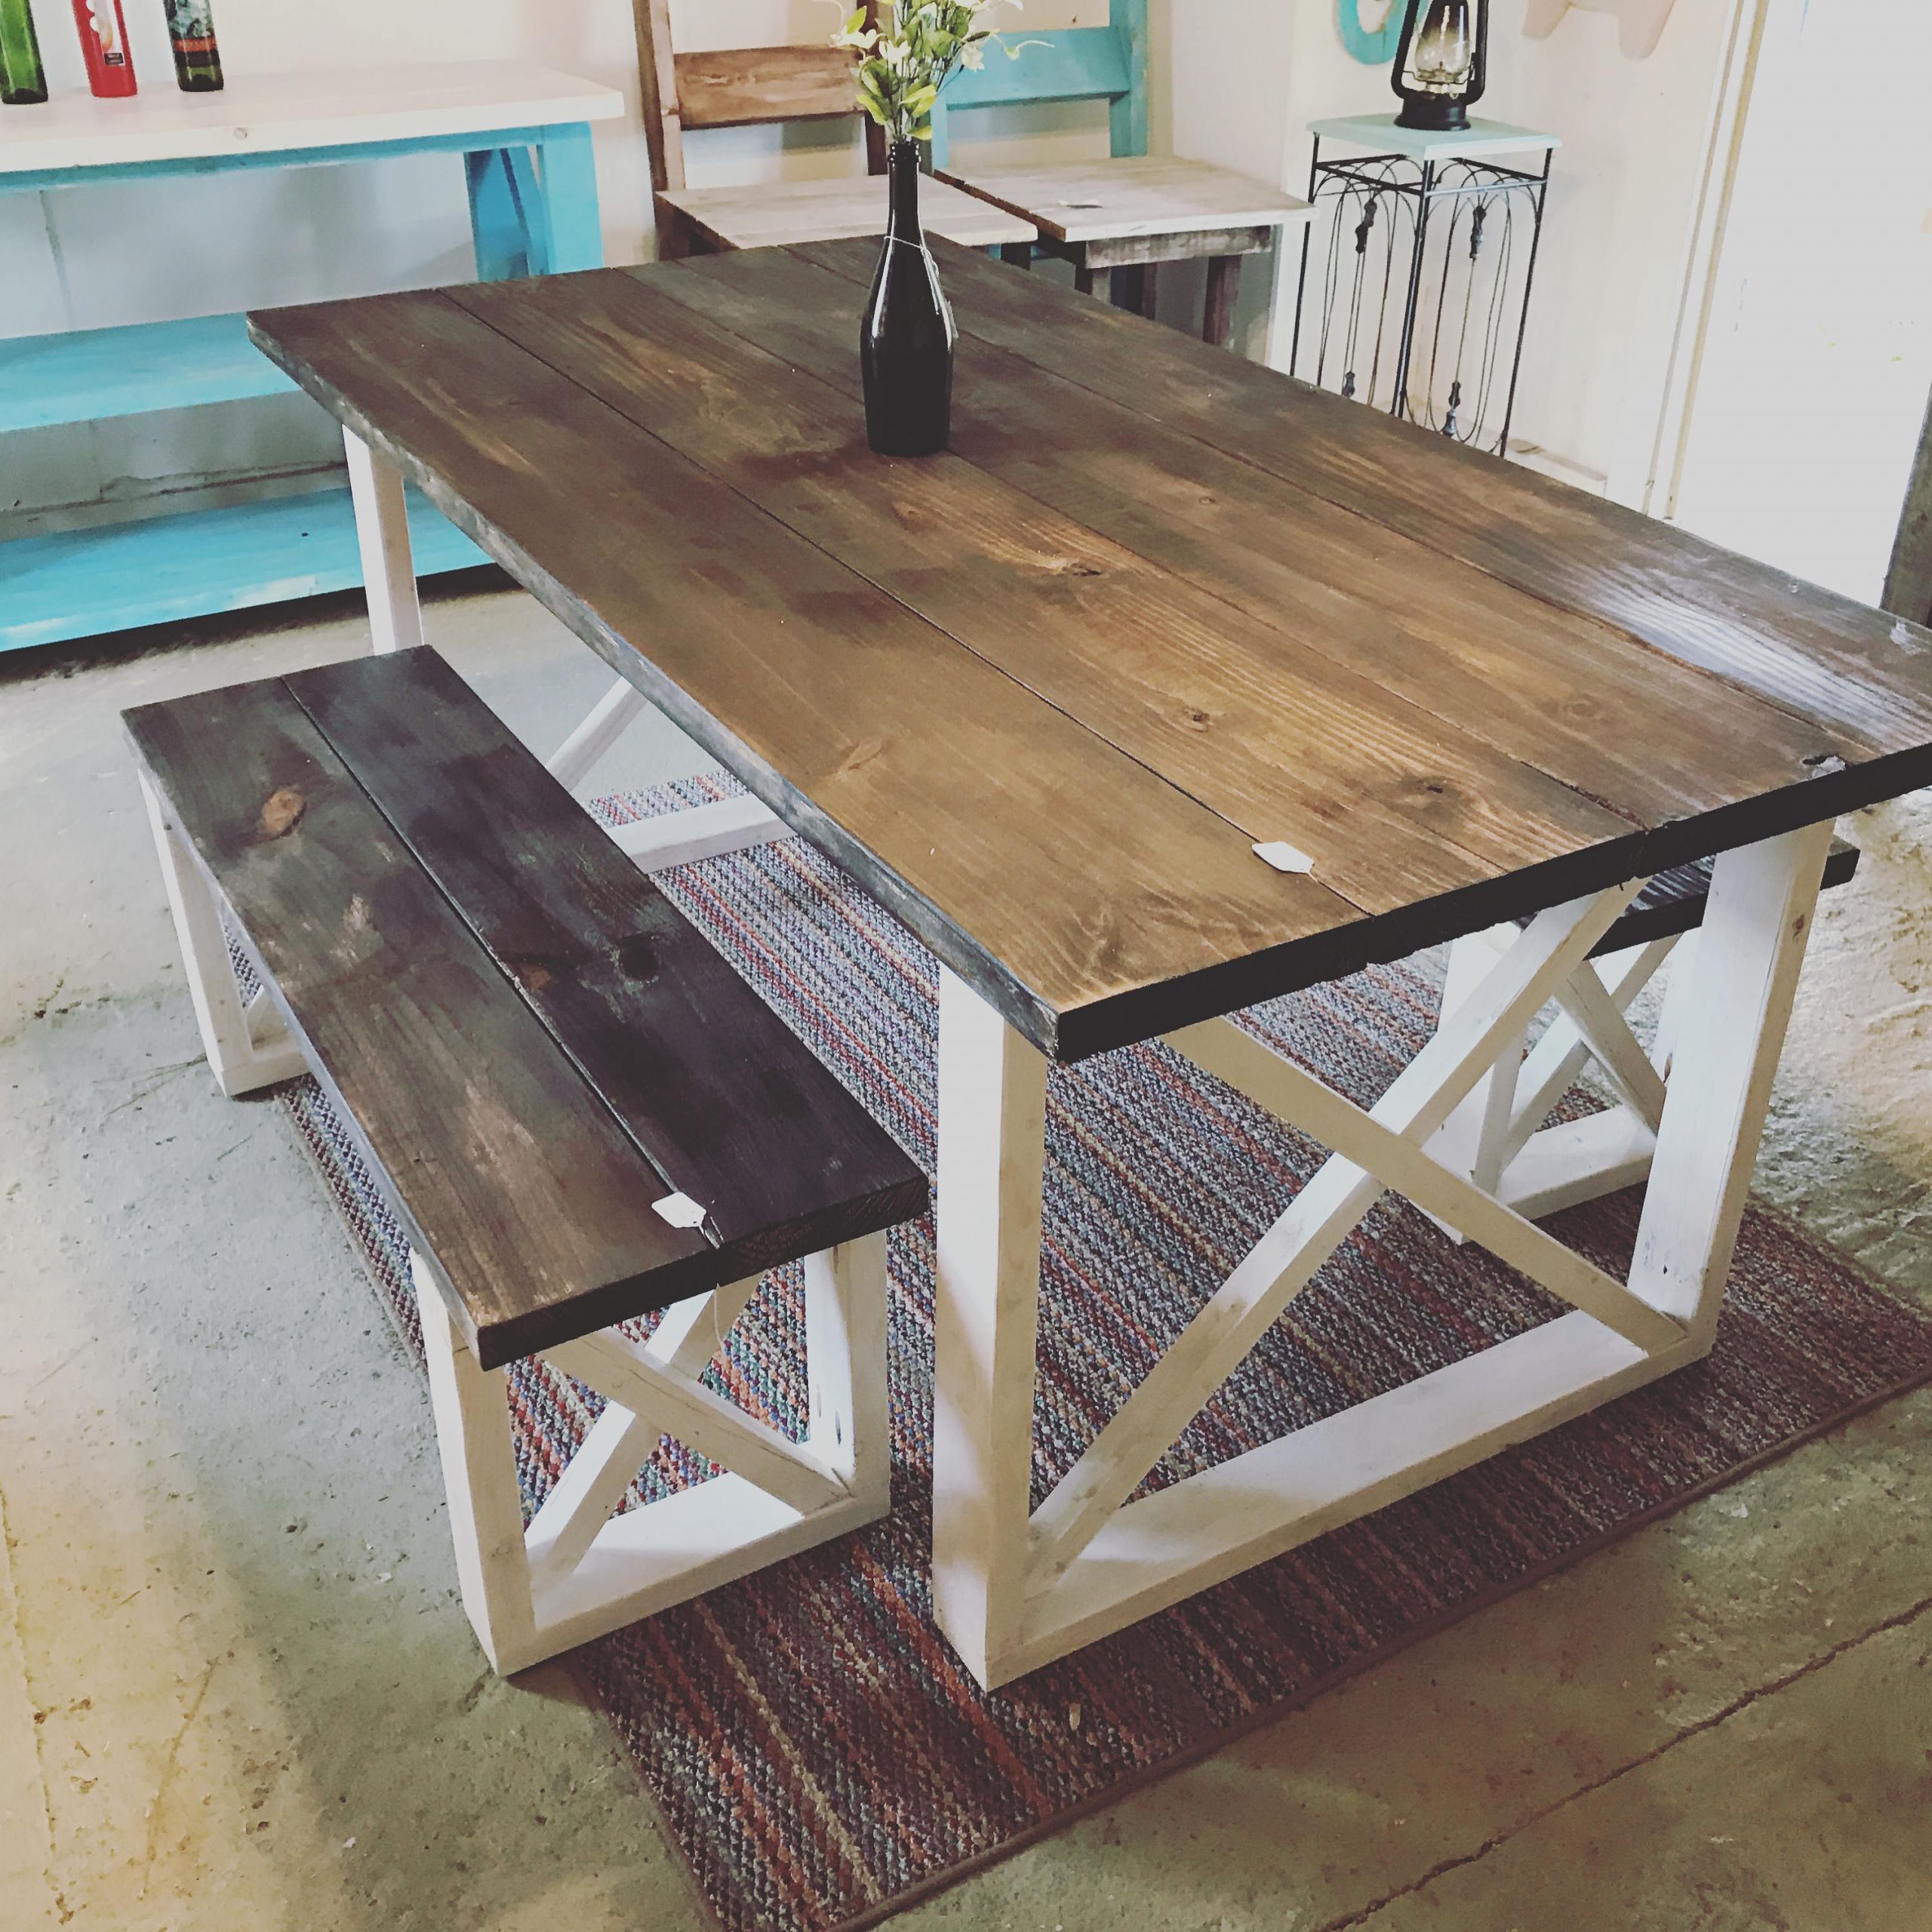 Rustic Farmhouse Kitchen Table
 Rustic Farmhouse Table With Benches with Dark Walnut Top